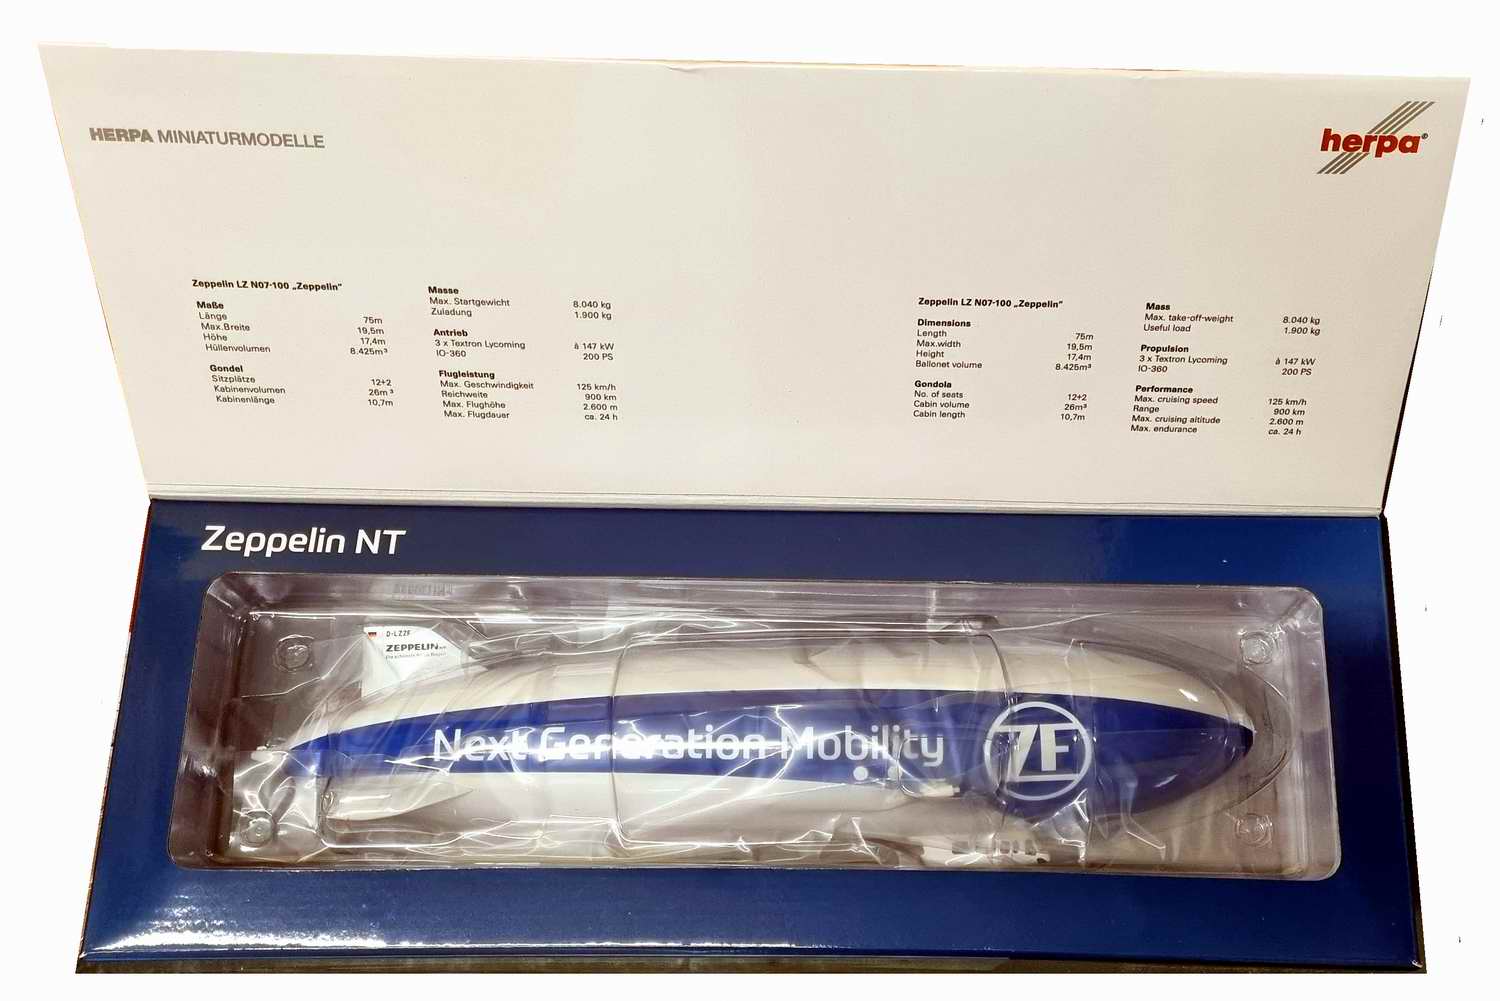 Maquette dirigeable Zepellin Reederei NT ZF Next Generation Mobility 1/200